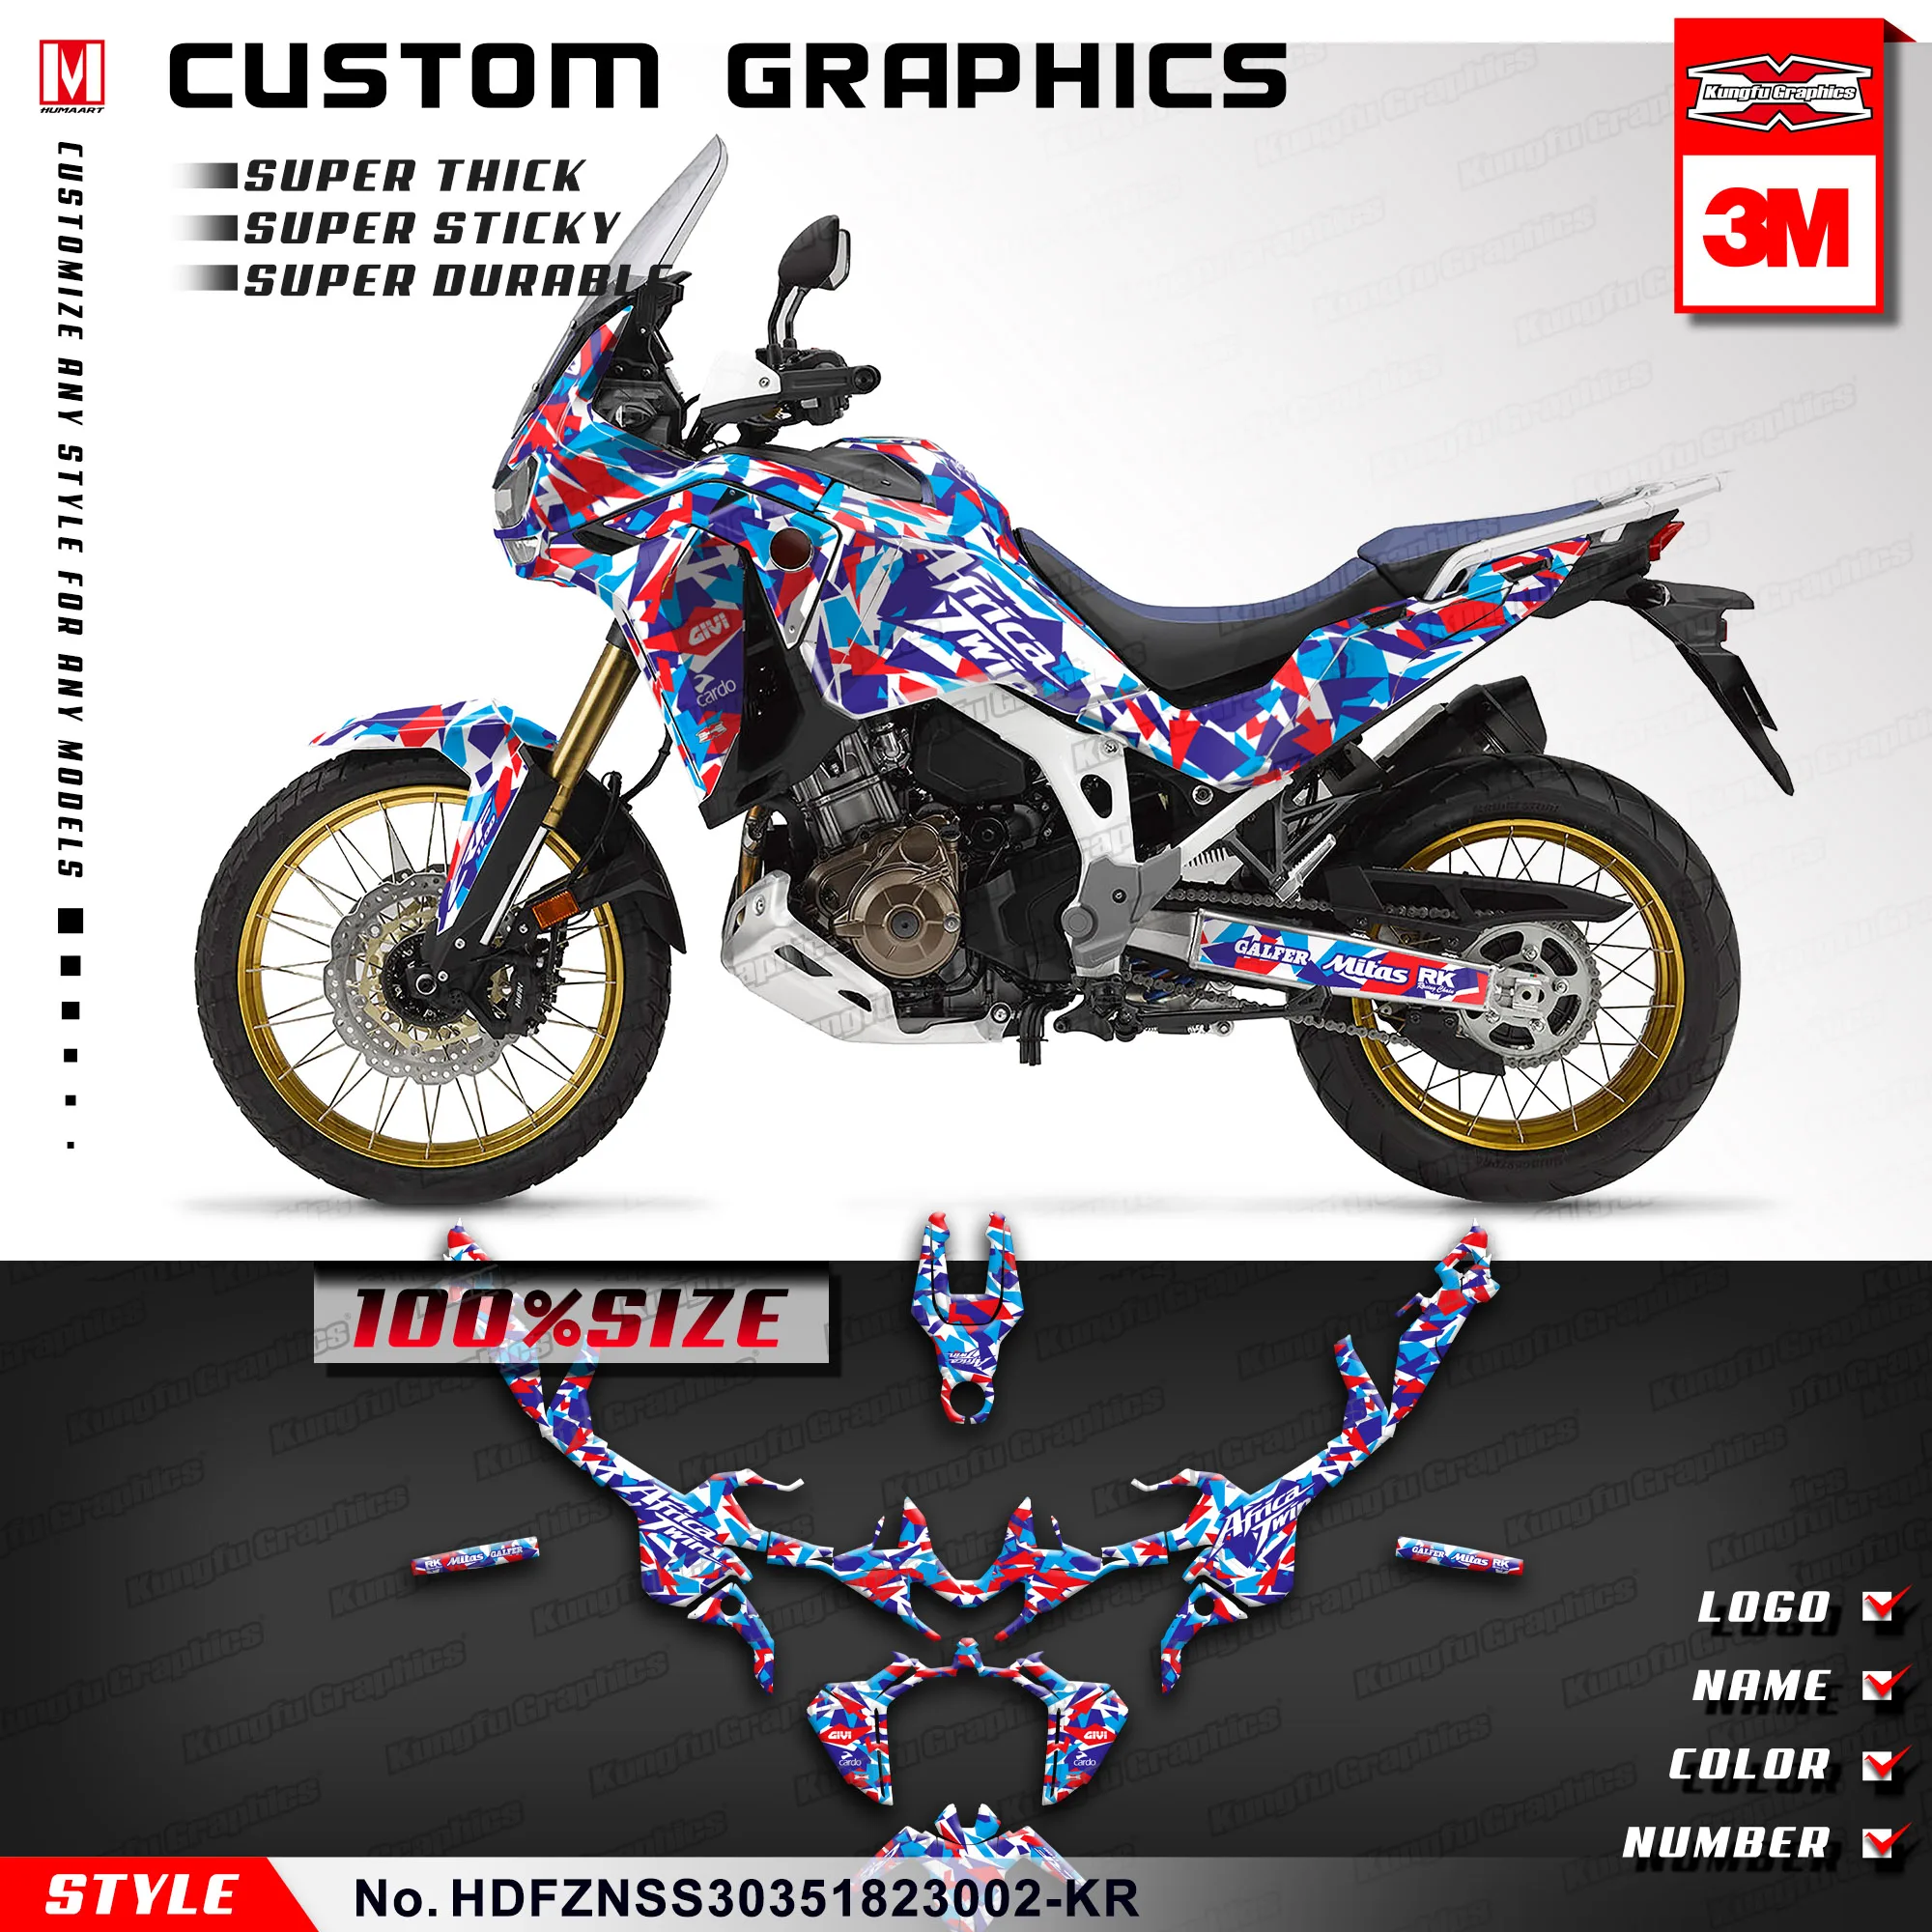 KUNGFU GRAPHICS Motorcycle Sticker Vinyl Decal Kit for Honda Africa Twin CRF1100L Adventure ADV 2020 2021 2022 2023